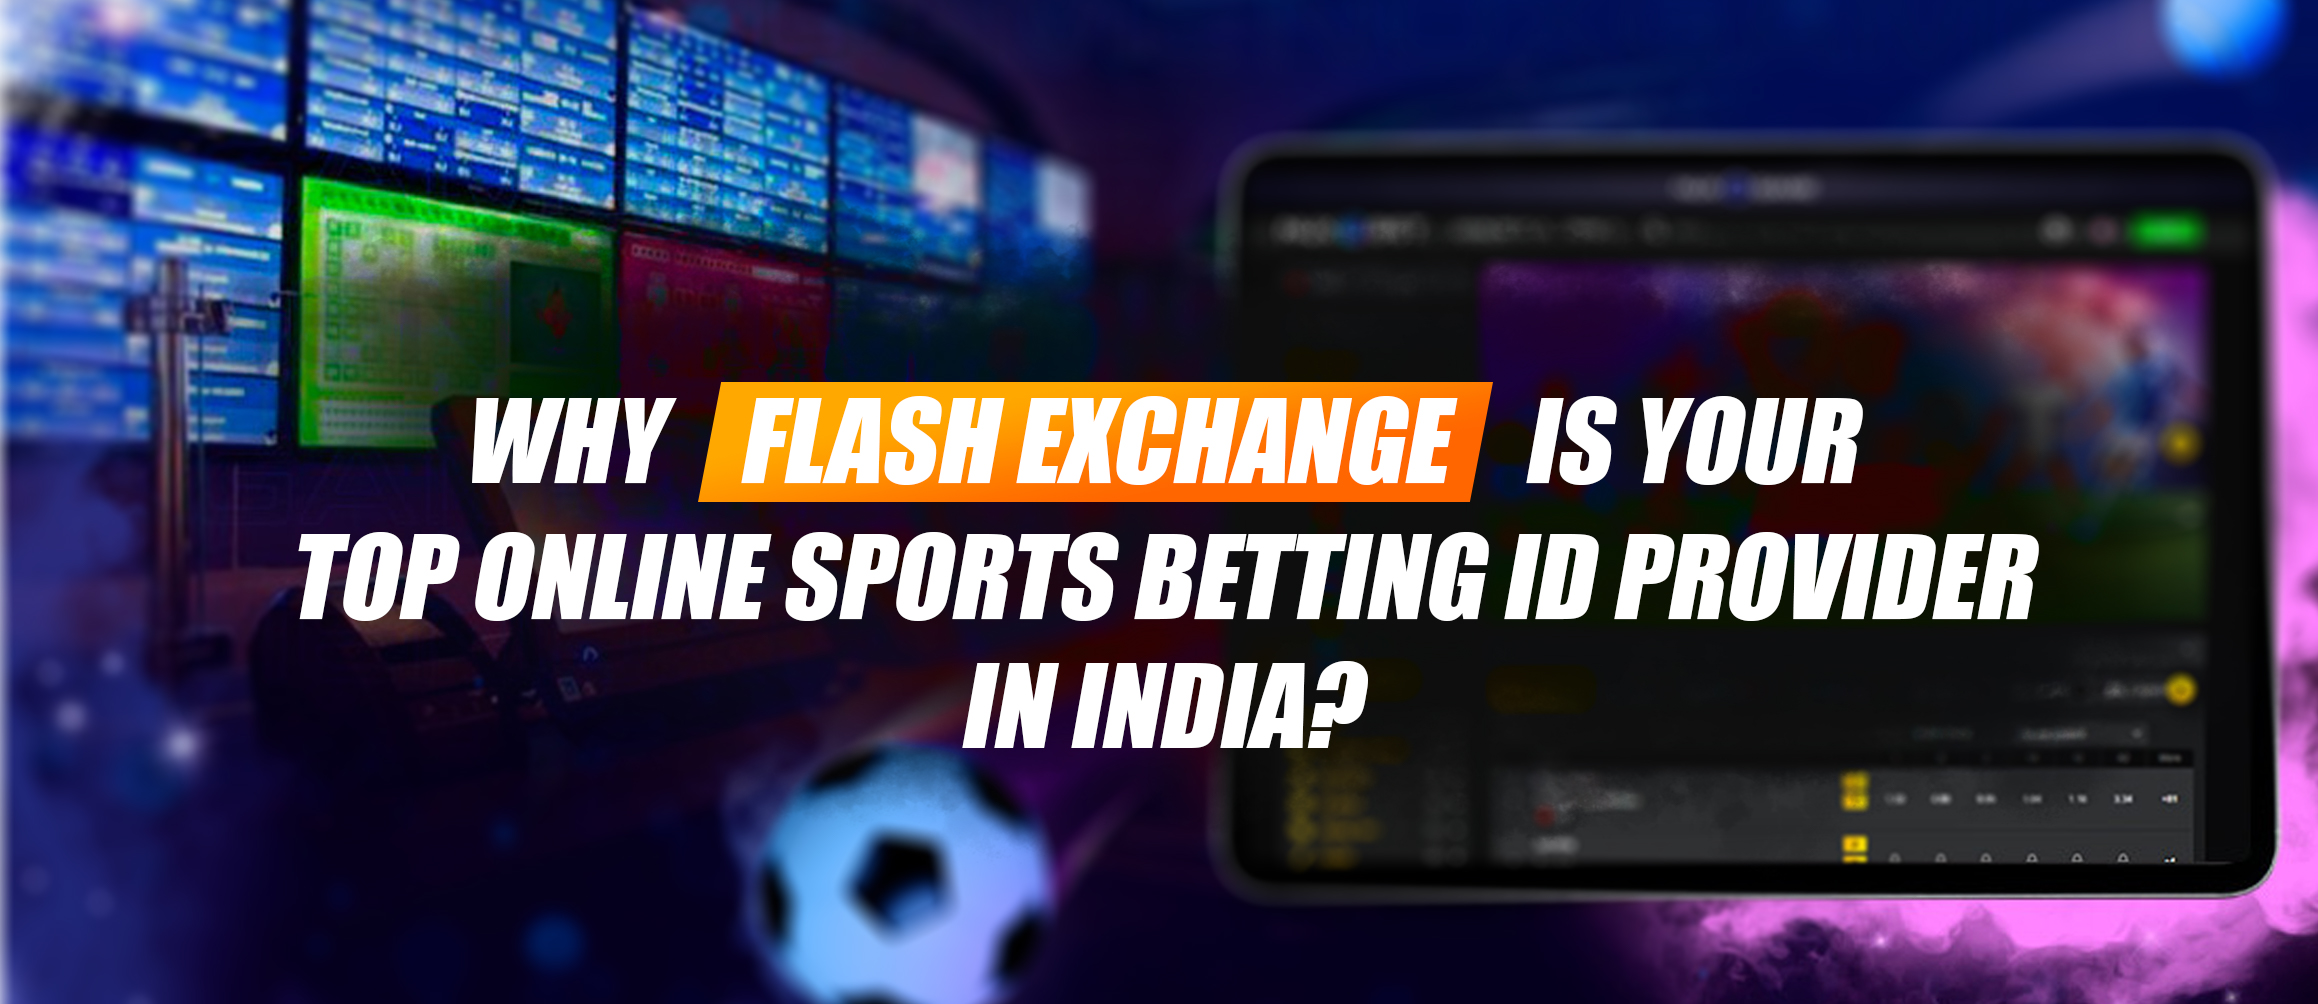 Why Flash Exchange is Your Top Online Sports Betting ID Provider in India?